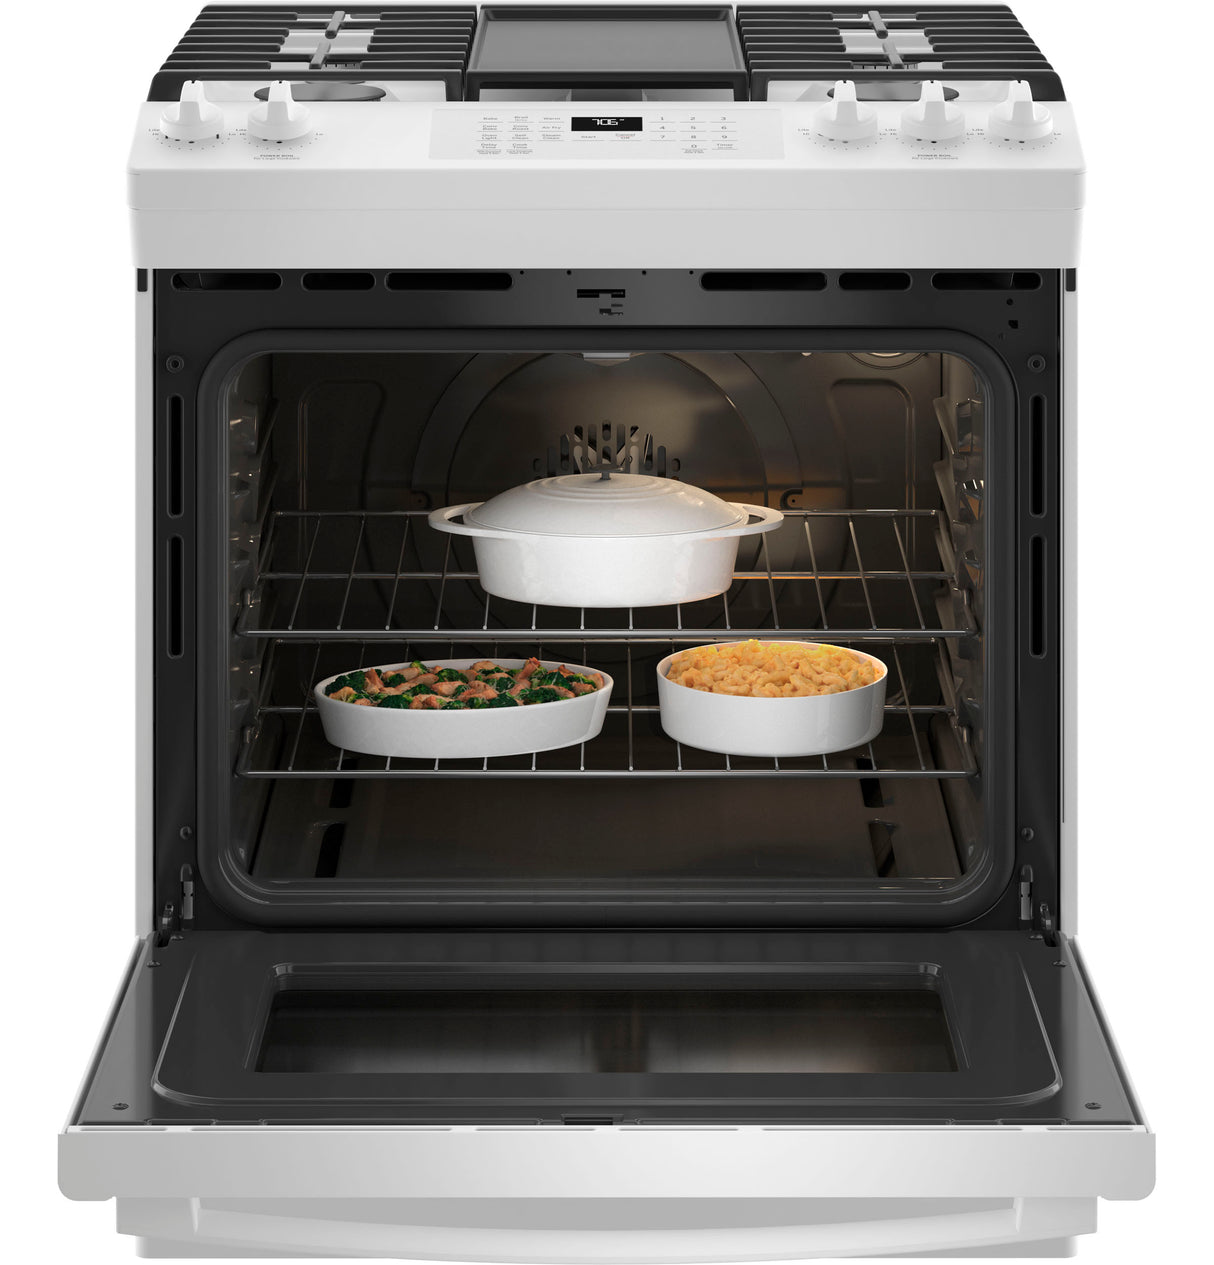 GE(R) 30" Slide-In Front-Control Convection Gas Range with No Preheat Air Fry - (JGS760DPWW)